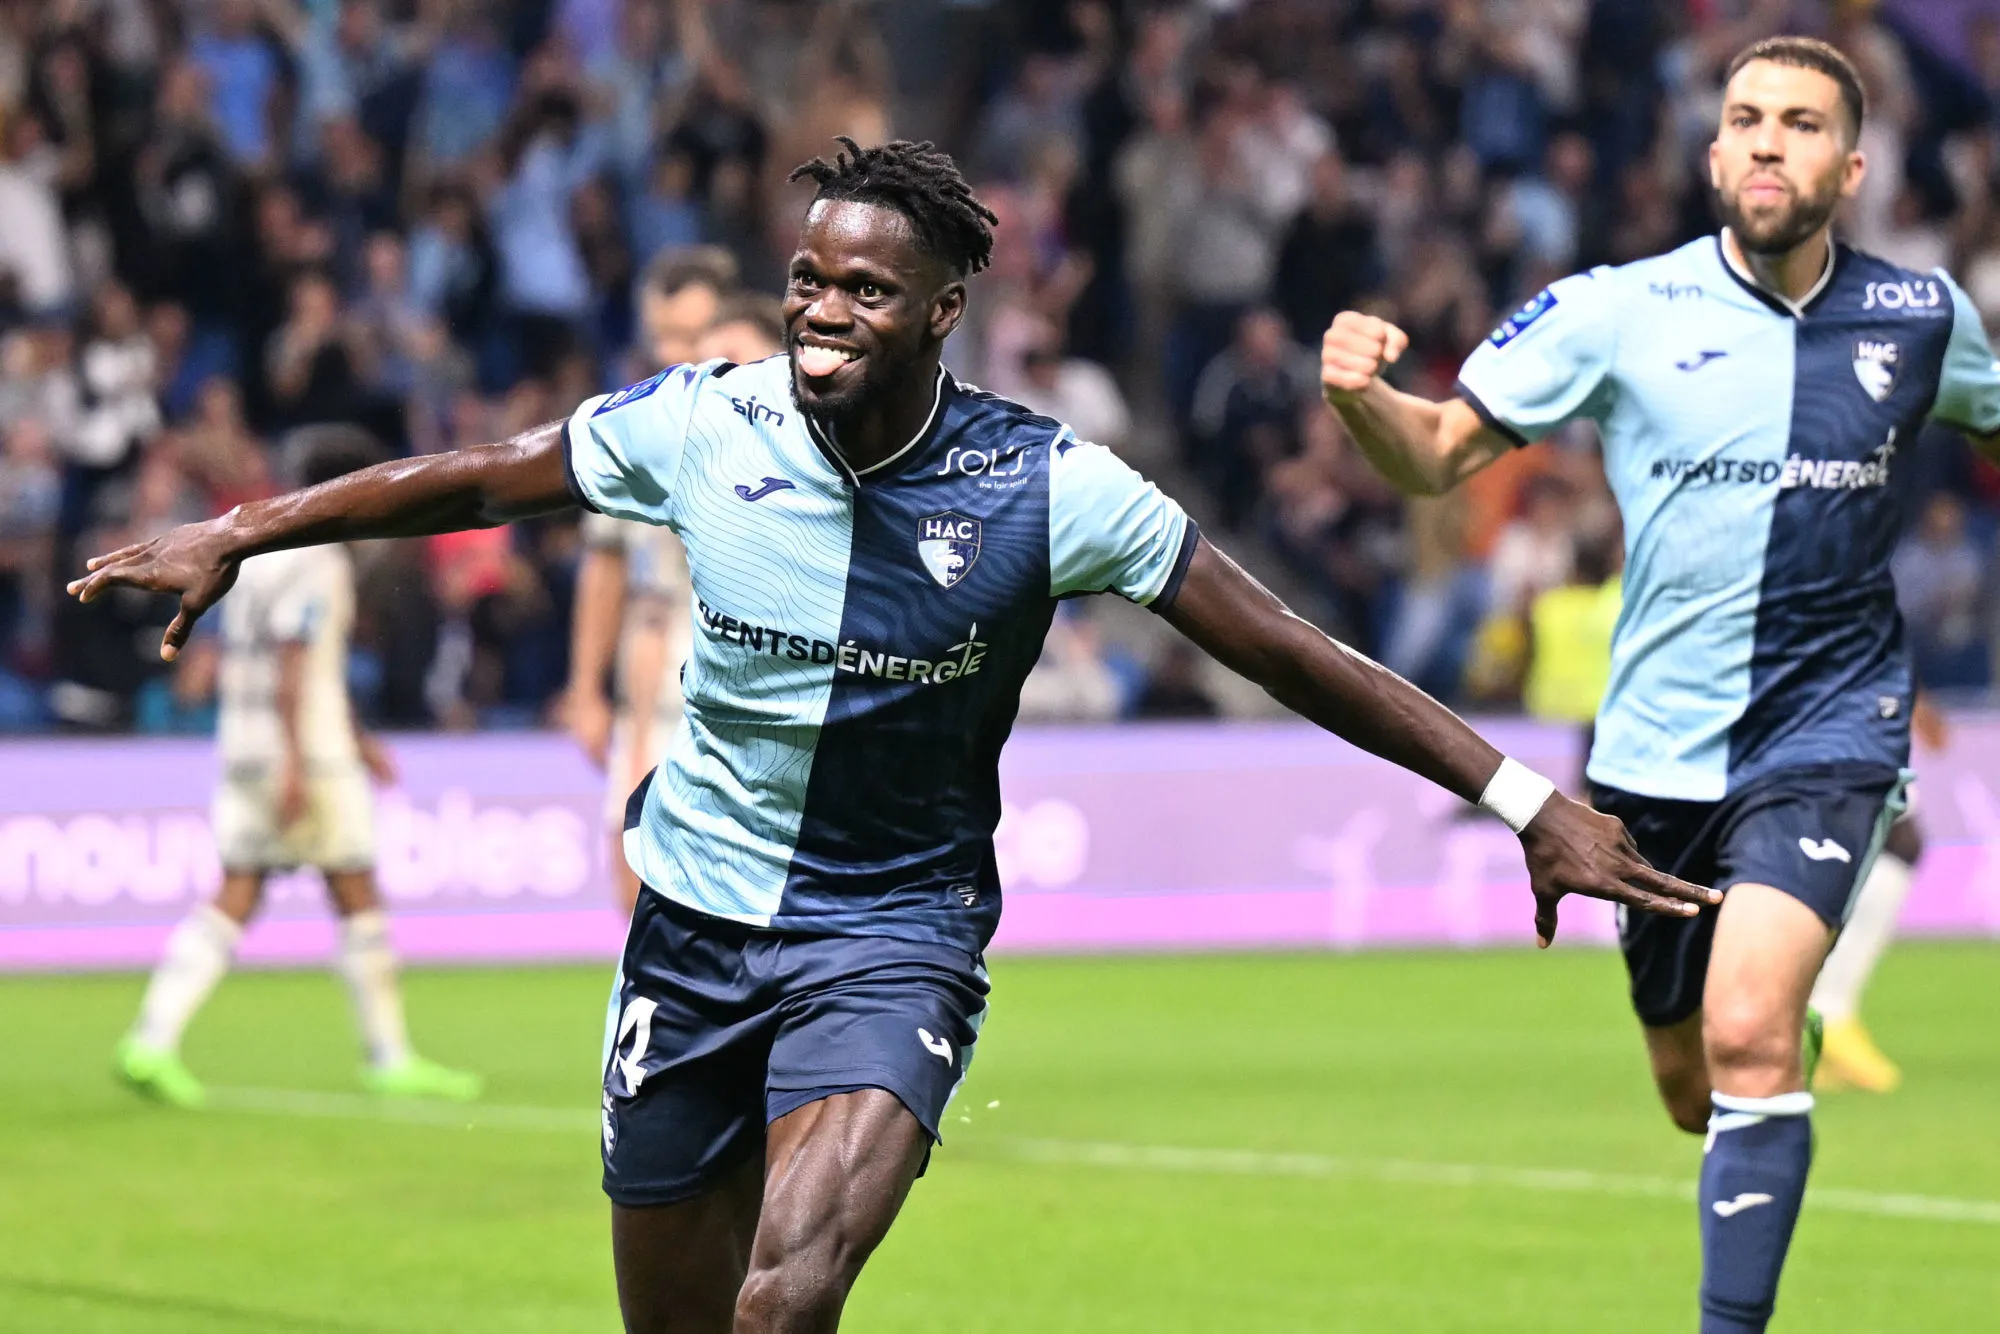 14 Jamal THIARE (hac) during the Ligue 2 BKT match between Le Havre and Caen at Stade Oceane on September 2, 2022 in Le Havre, France. (Photo by Anthony Bibard/FEP/Icon Sport) - Photo by Icon sport